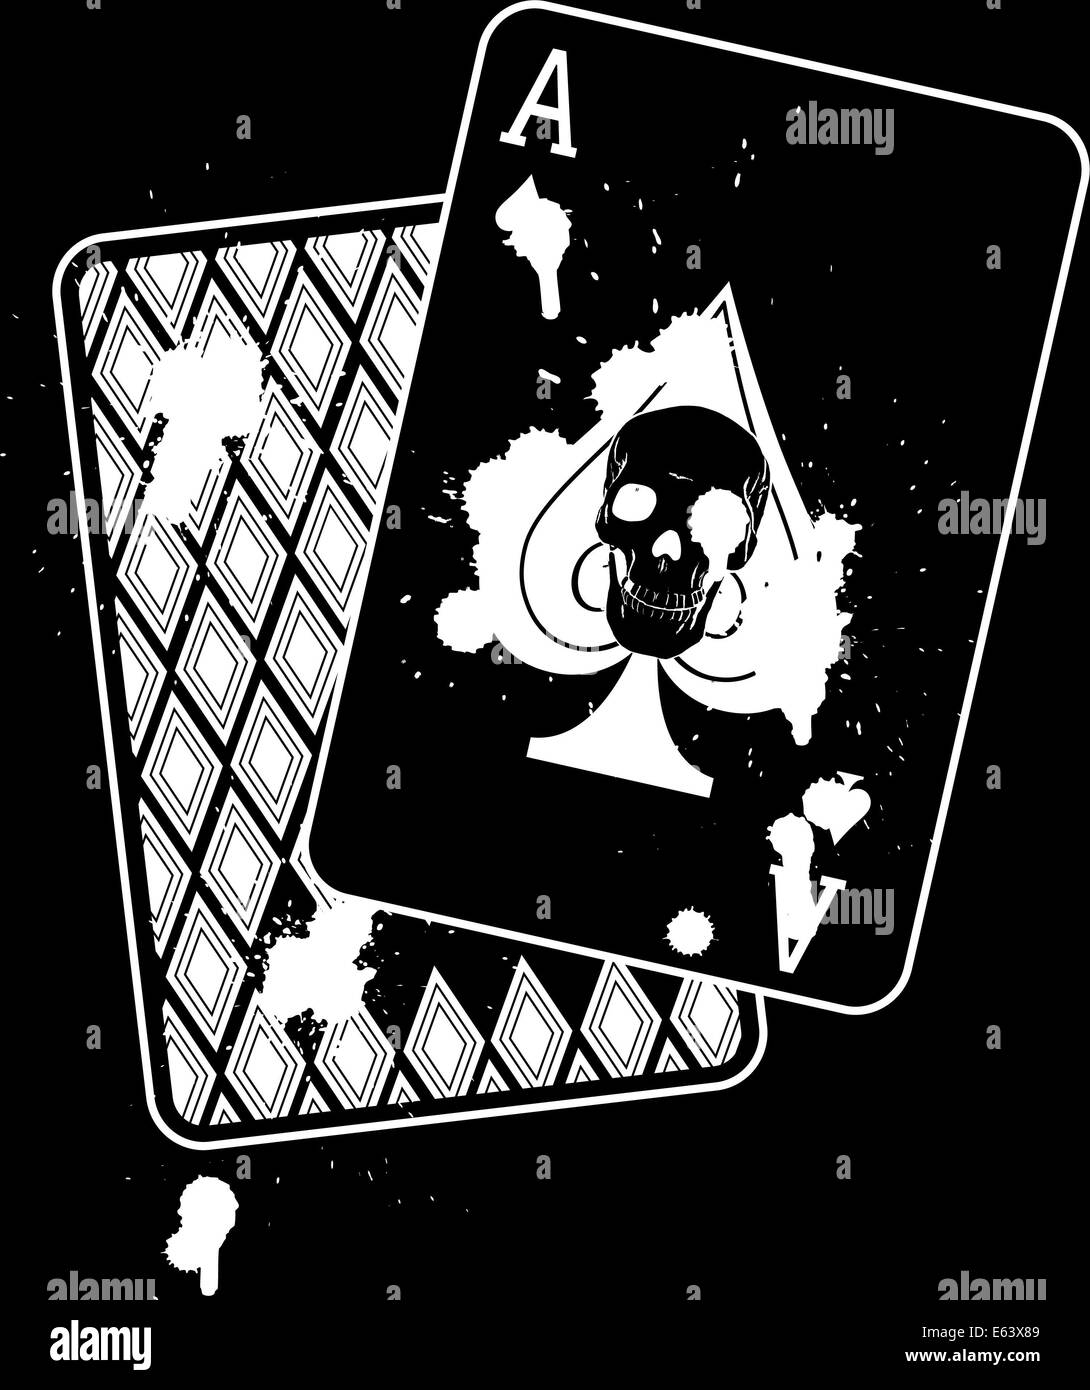 Concept Image of Ace of Spades with a Skull Image inside and a Splatter ...